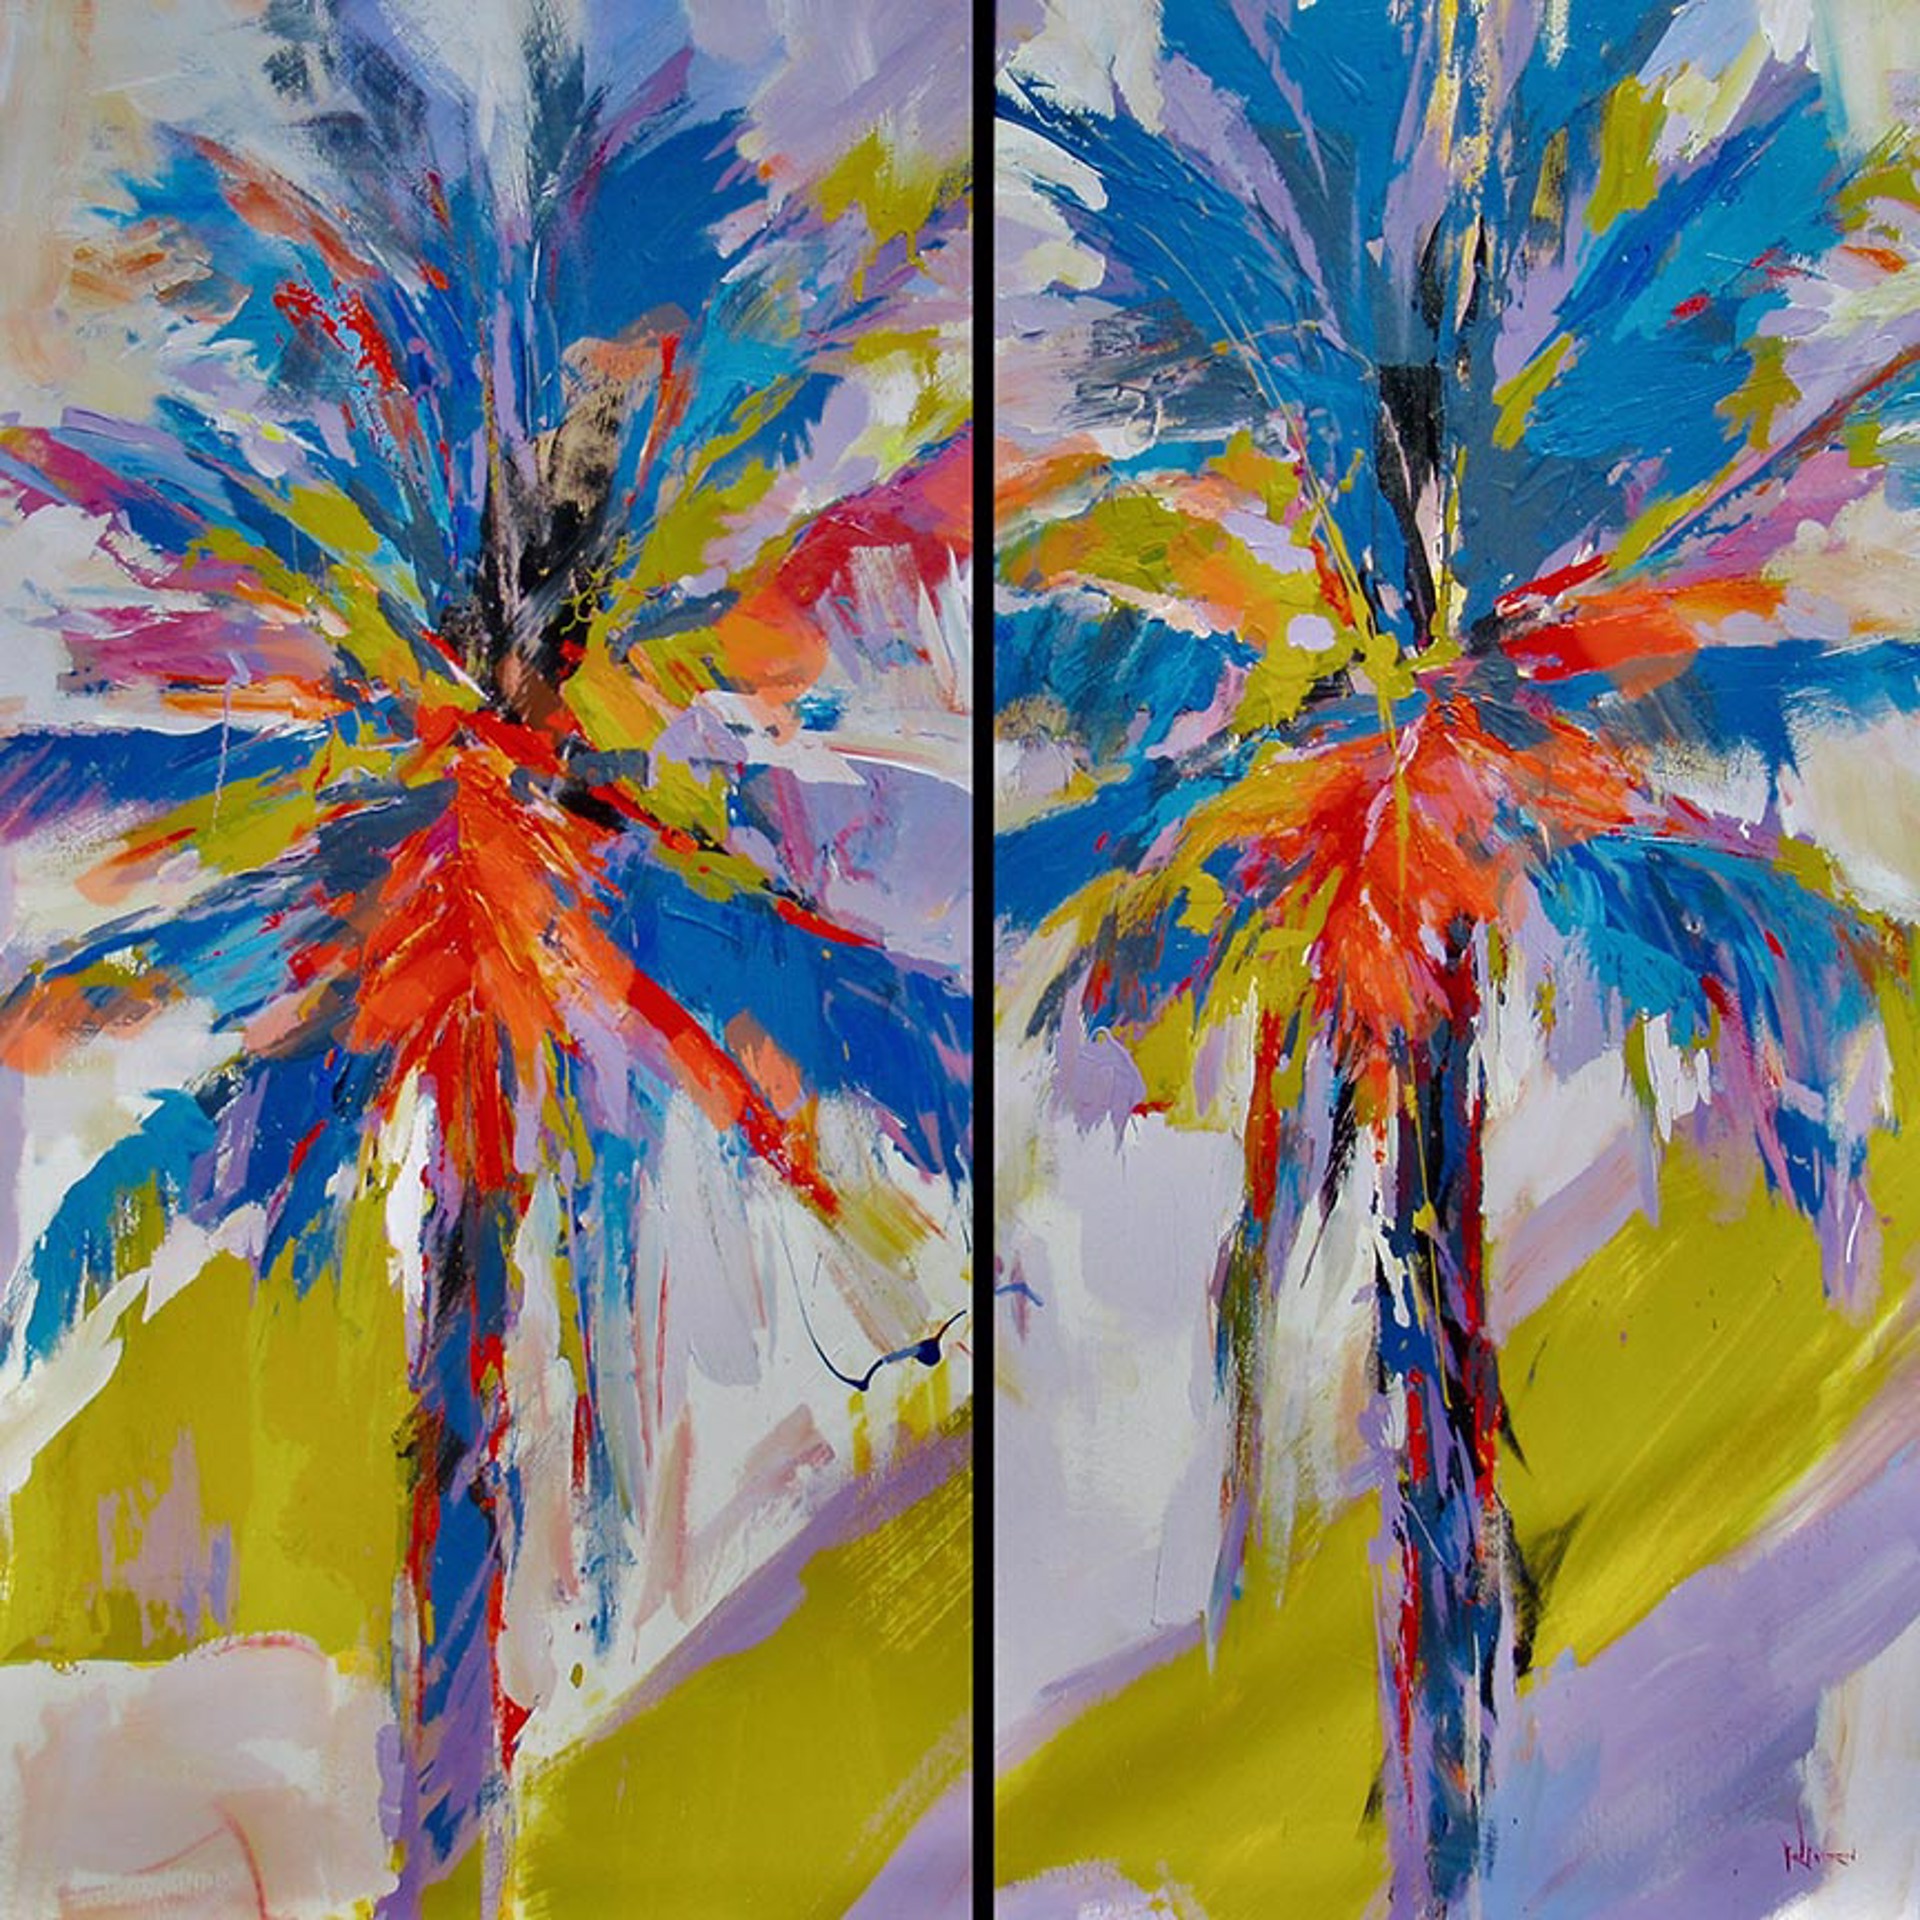 Tropic Intuition - Sold by Commission Possibilities / Previously Sold ZX